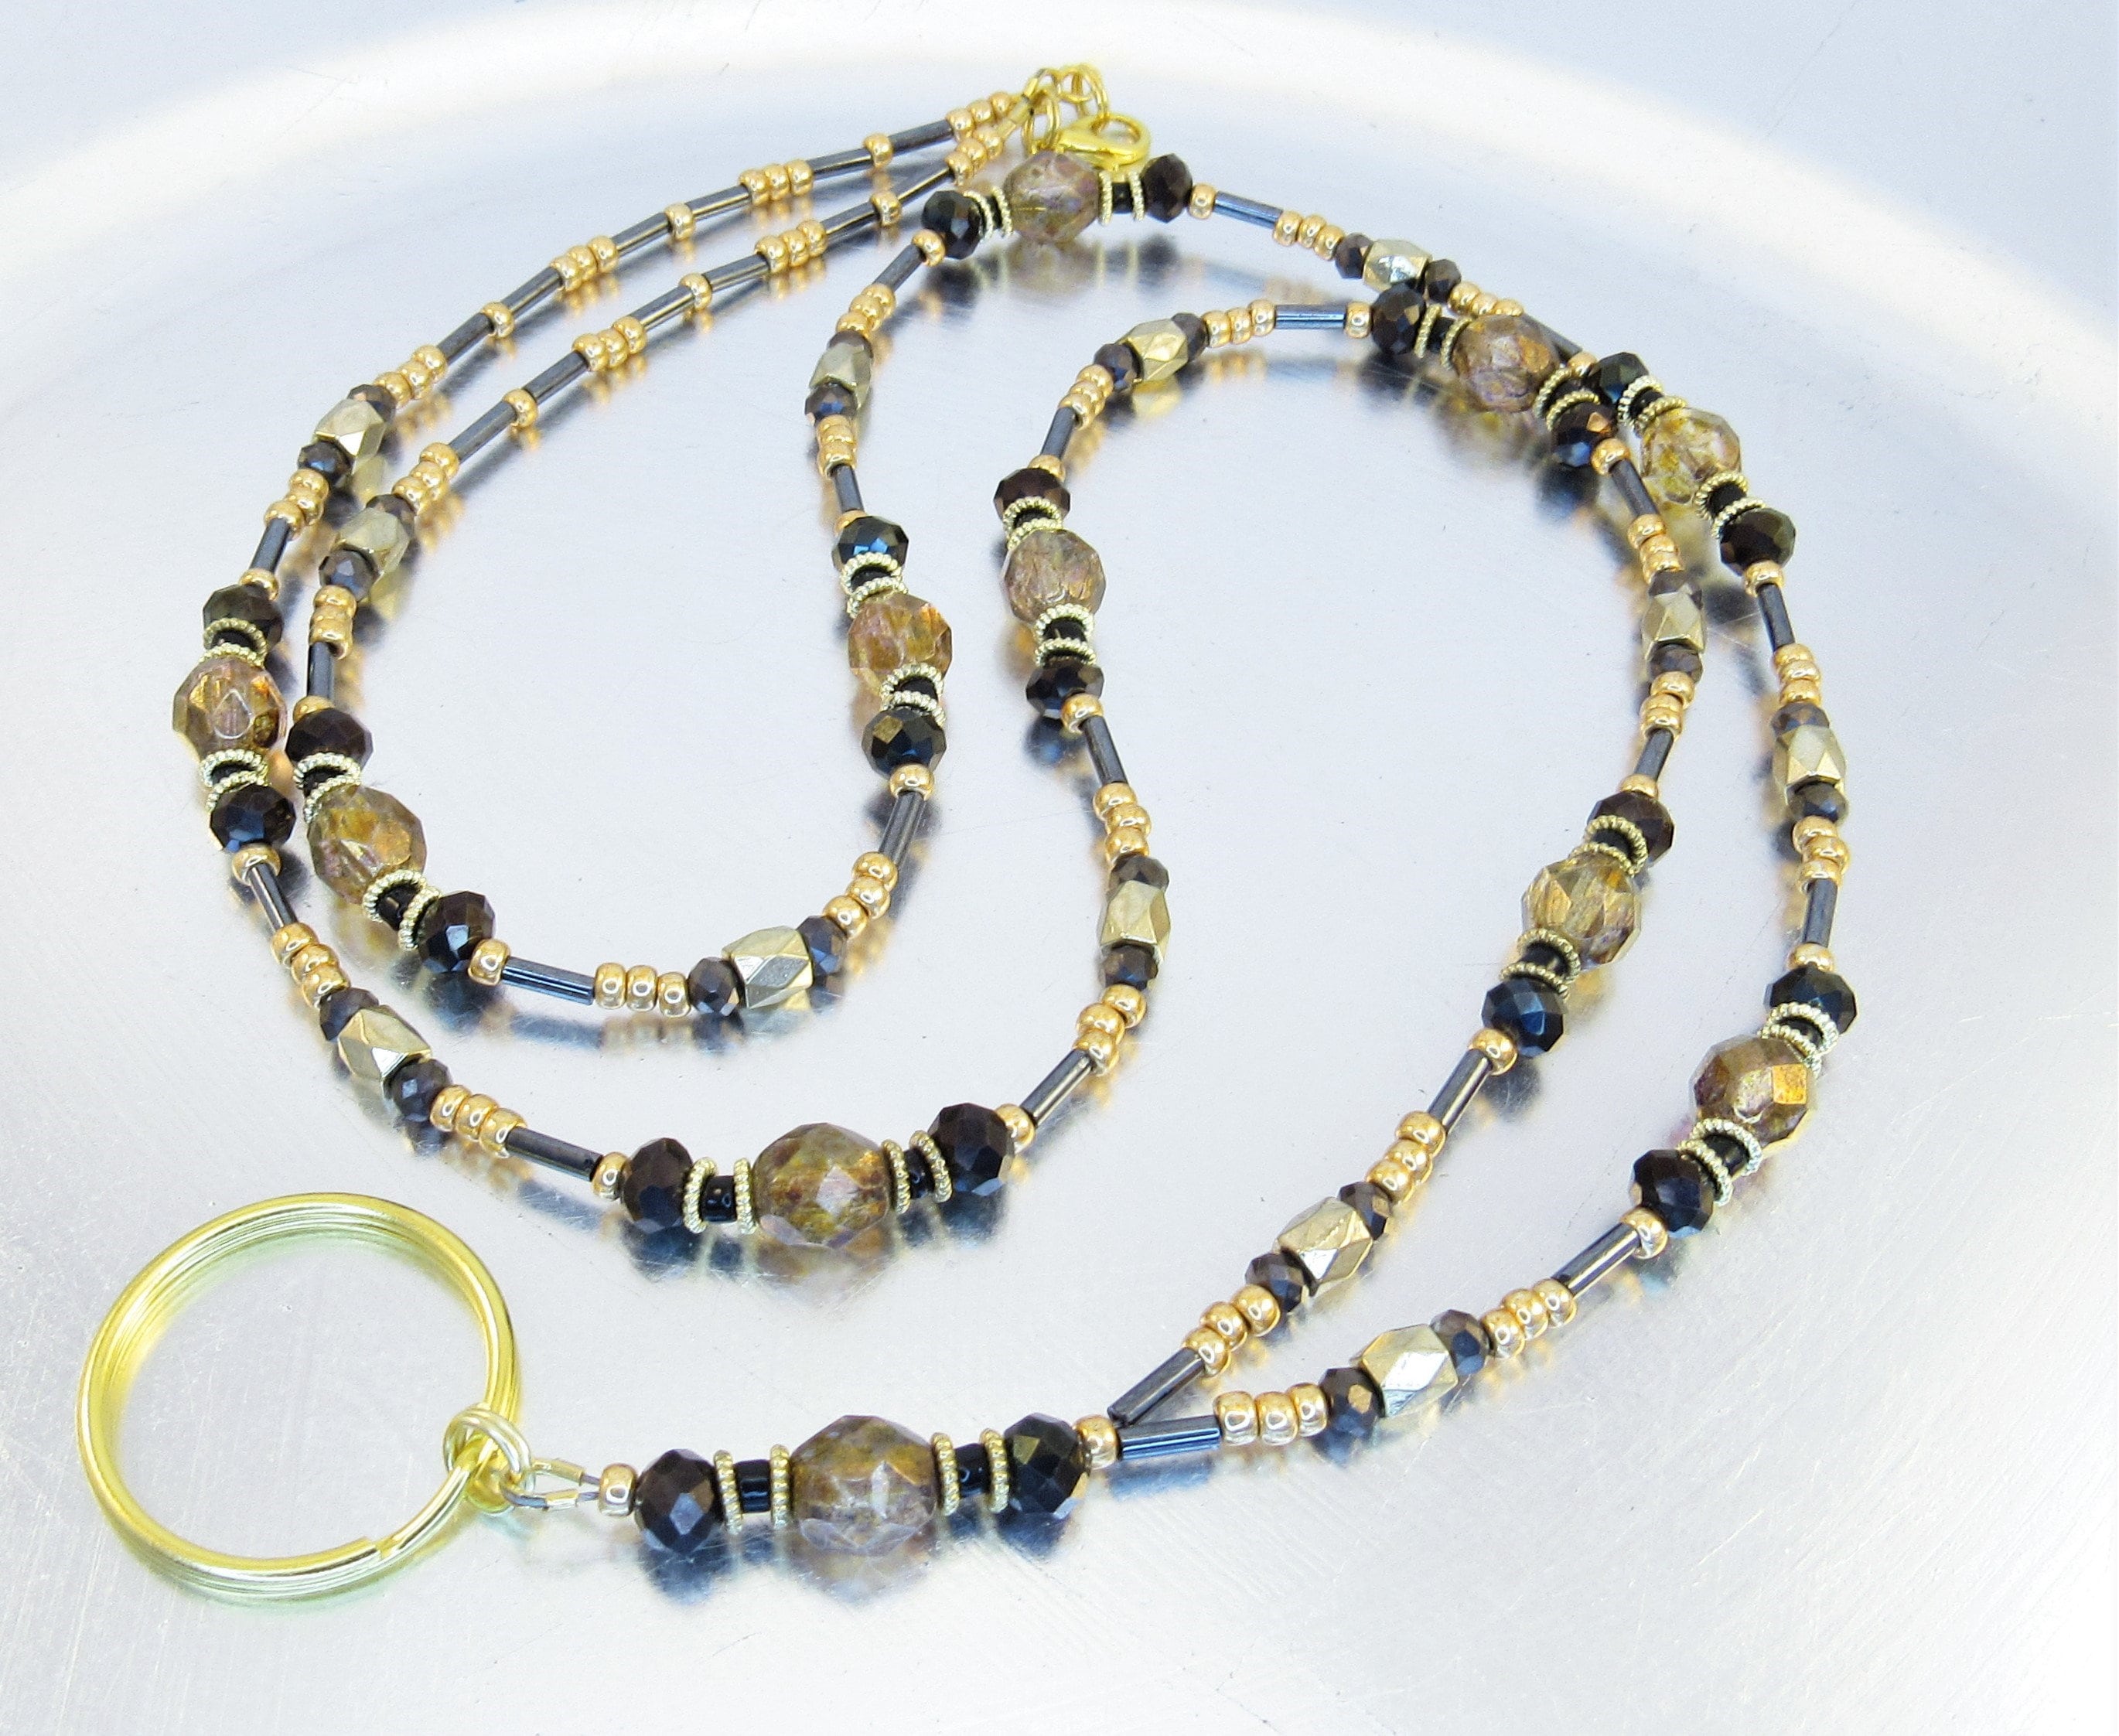 Golden Topaz Czech Glass and Faceted Aurora Borealis Black Crystal Beaded  ID Lanyard, Badge Holder, ID Badge Necklace